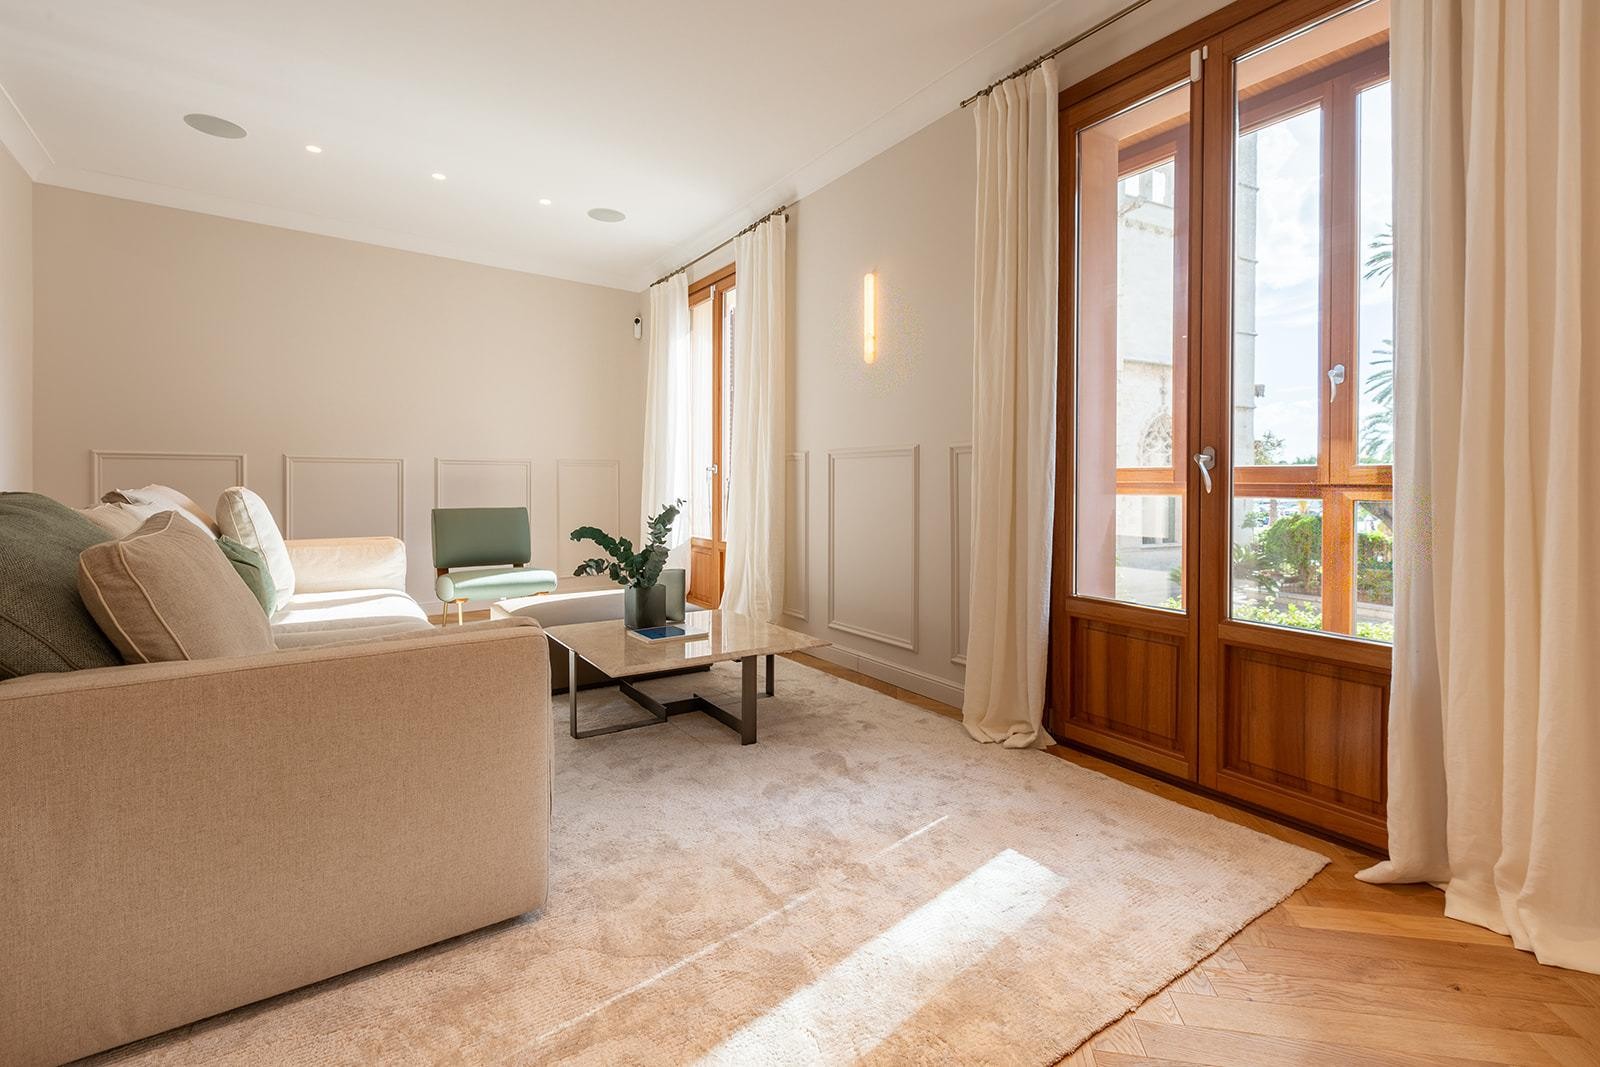 Modern design in the refurbishment of these large flats in a historic building in the Lonja.